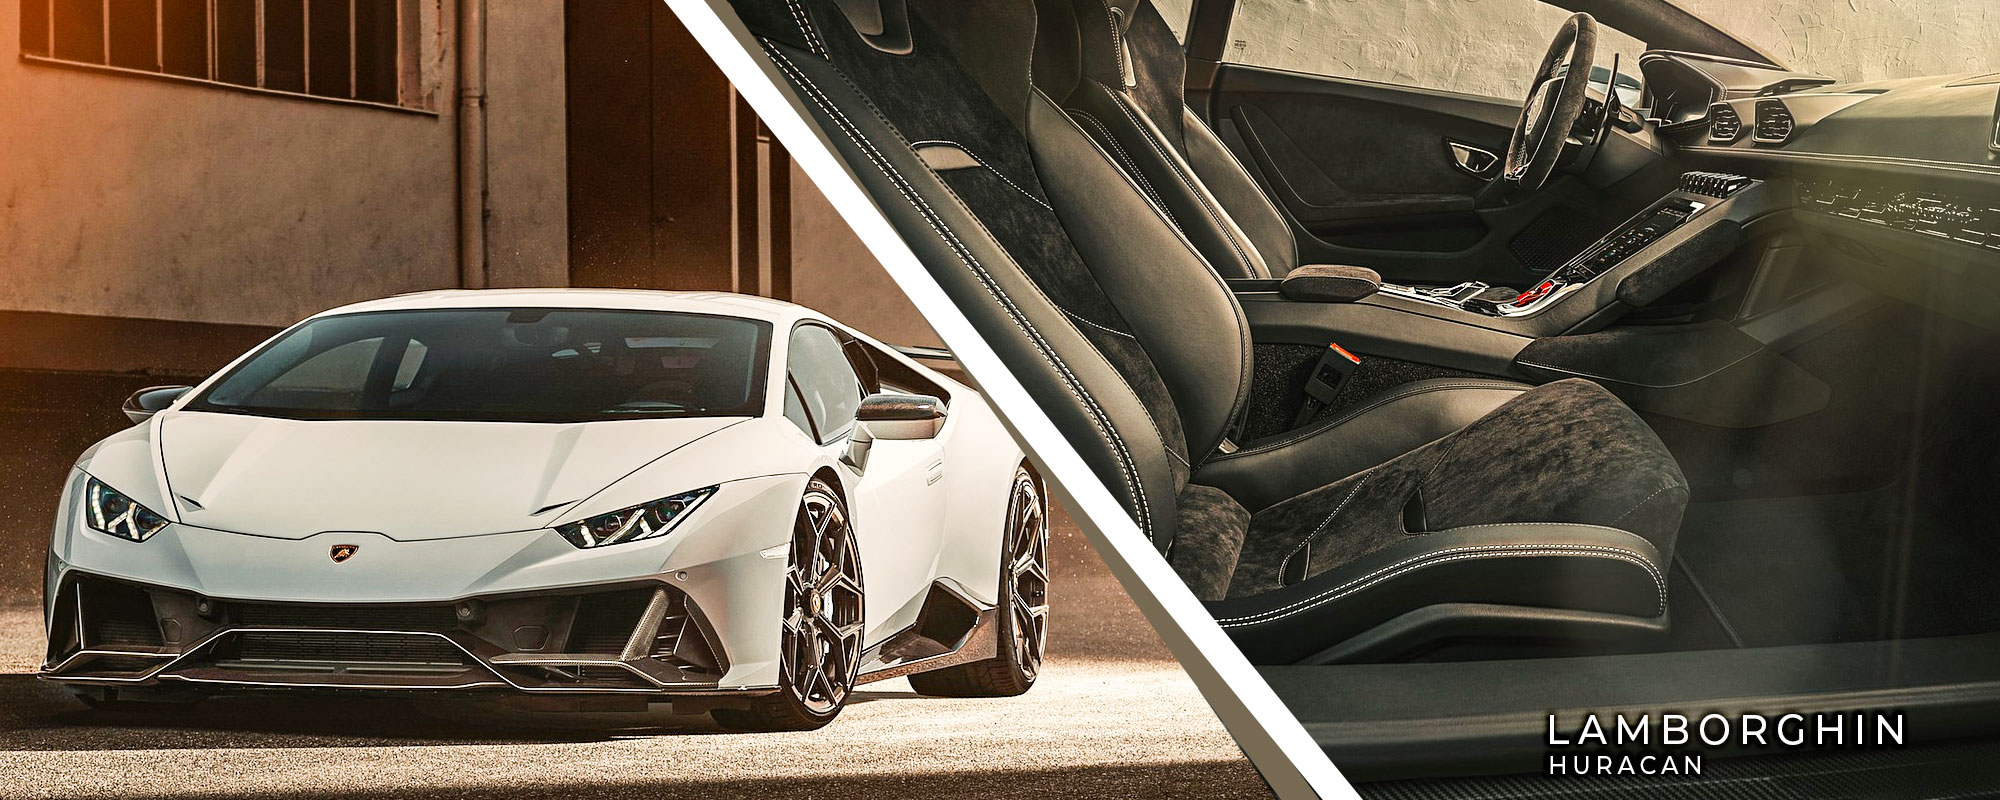 Starr Luxury Cars - Lamborghini Huracan Self-hire and Chauffeur service, where exclusivity meets the opulence with the best coveted and exotica cars, - UK, Berkeley square, Mayfair